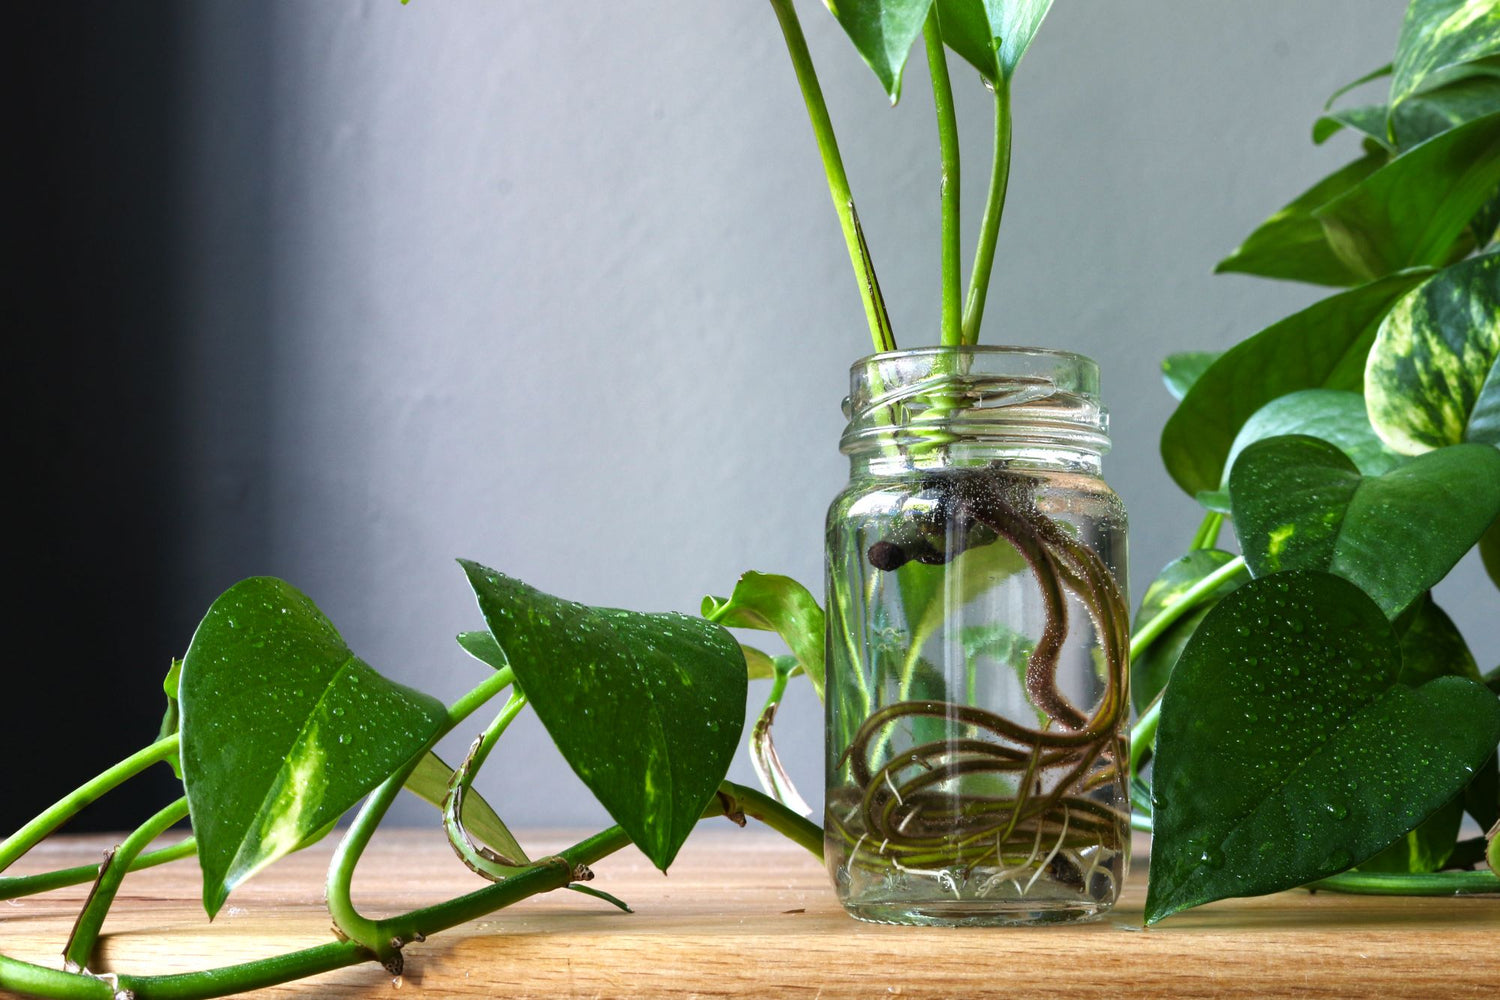 A jar of water containing a propagating pothos plant. The plant's roots can be seen curling around in the water. Droplets of water on the plant's leaves, which are lush and green, and shoot upward on thin stems. The plant is thriving in its watery environment, and the roots are visibly growing, indicating successful propagation. The water jar adds a unique decorative element.